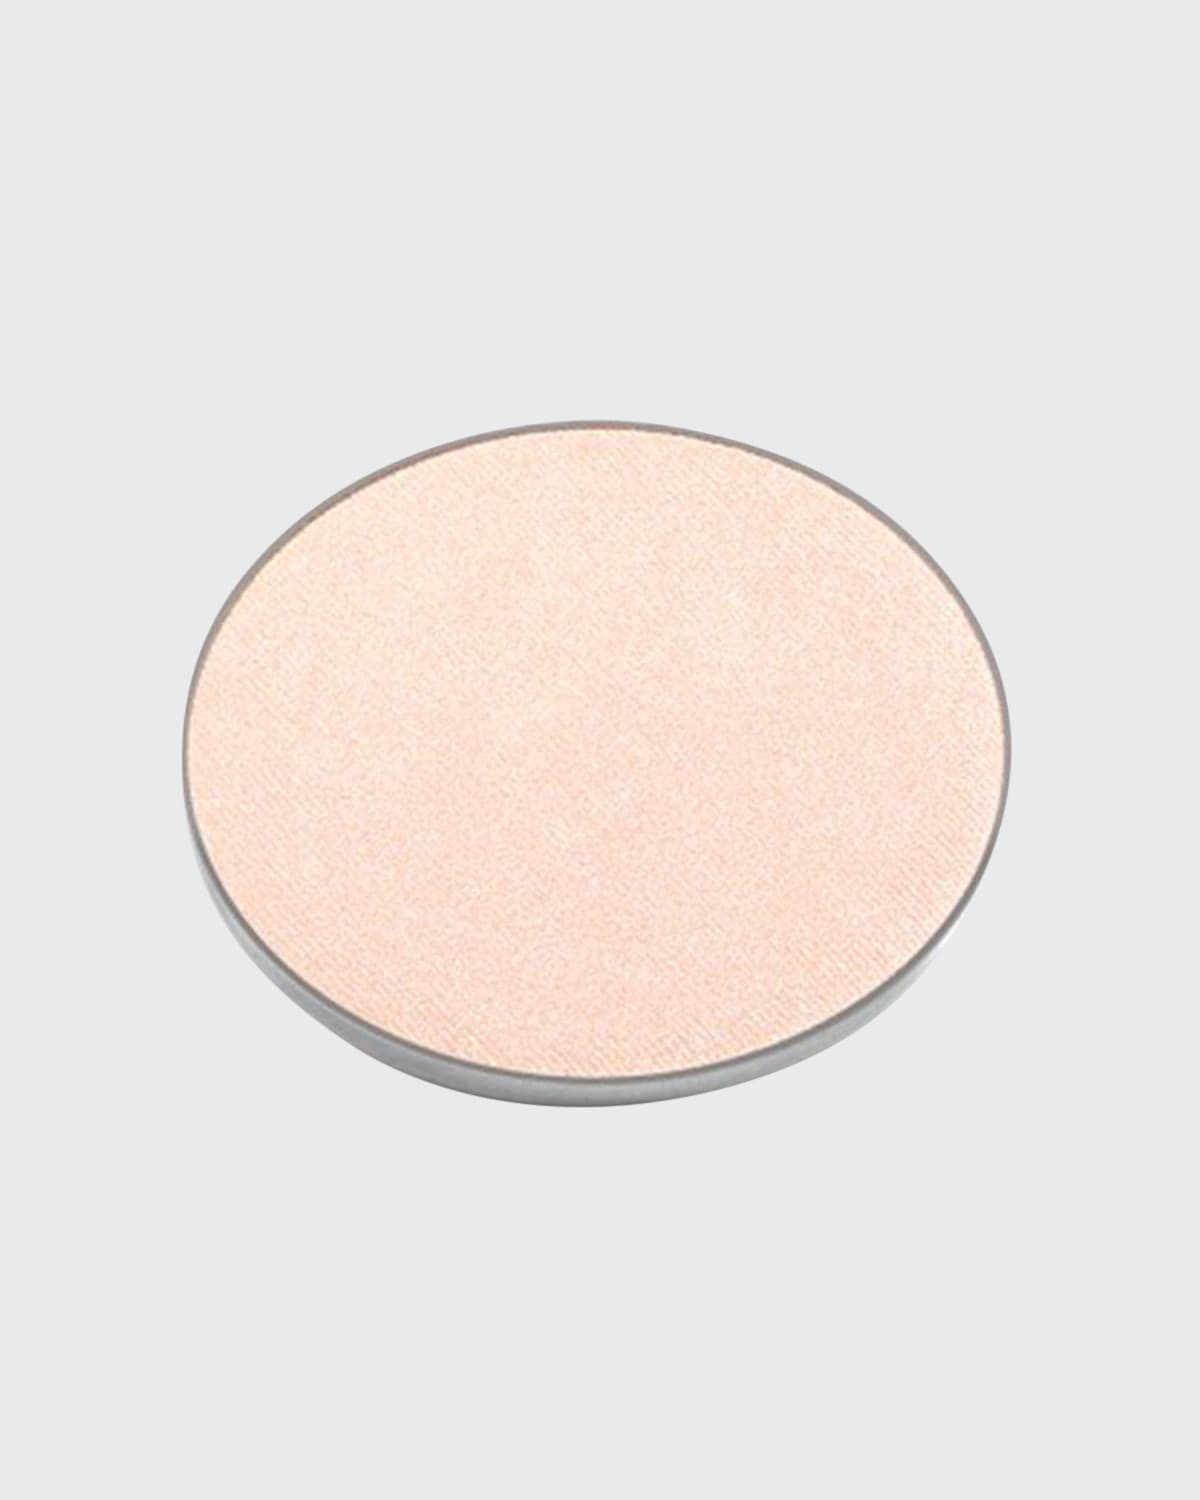 Chantecaille Shine Eyeshadow Palette Refill In Almond